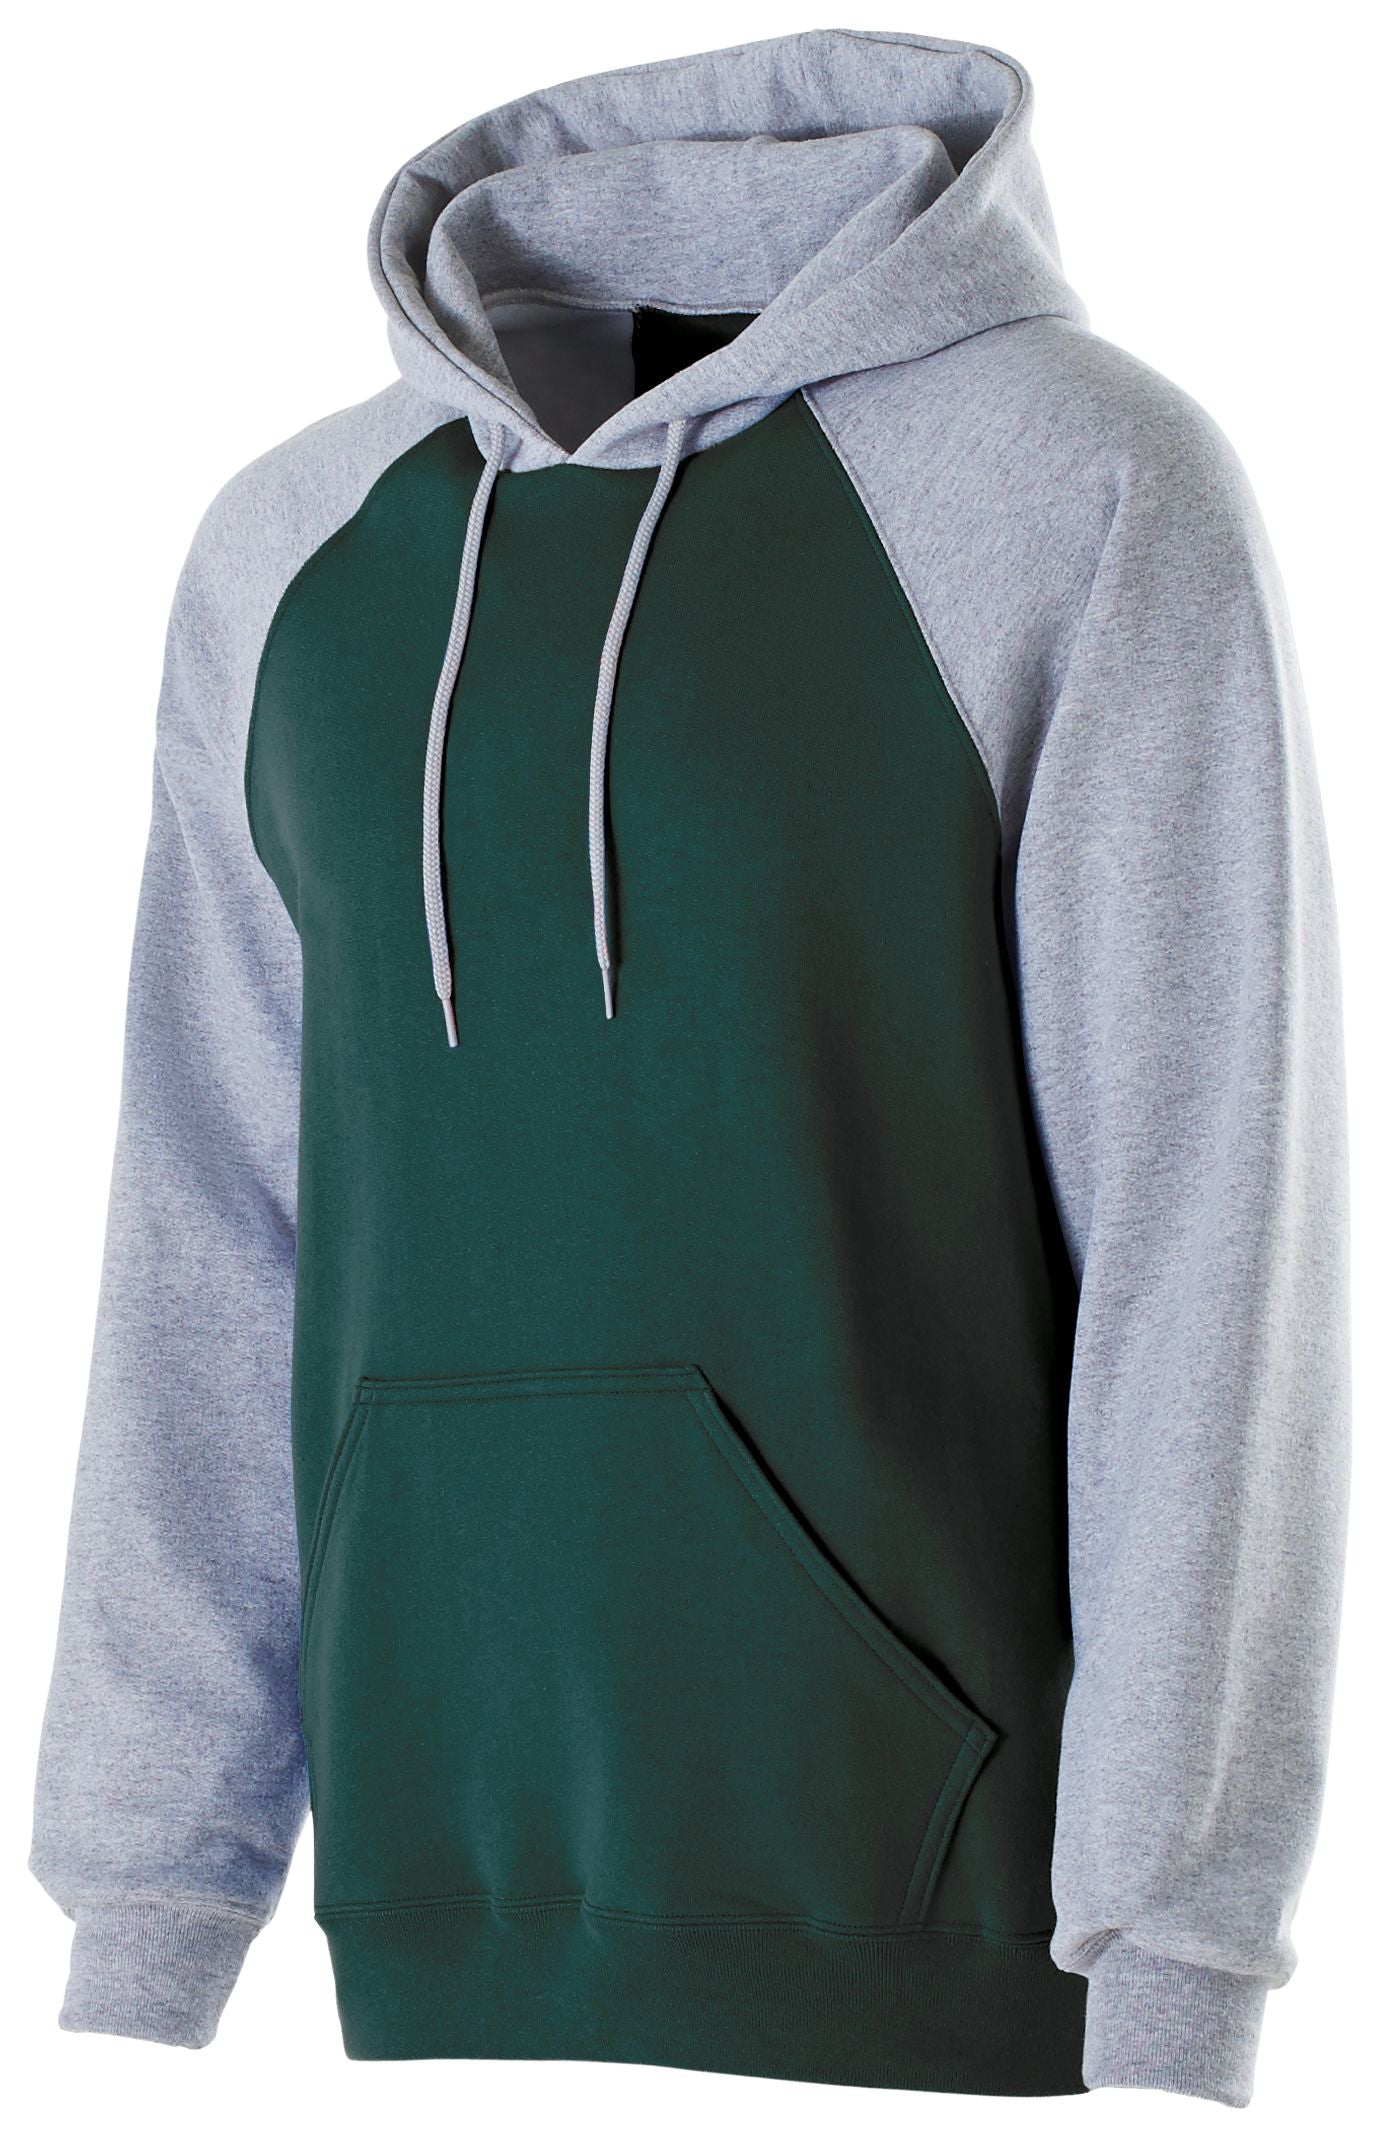 Holloway Banner Hoodie in Dark Green/Athletic Heather  -Part of the Adult, Adult-Hoodie, Hoodies, Holloway product lines at KanaleyCreations.com